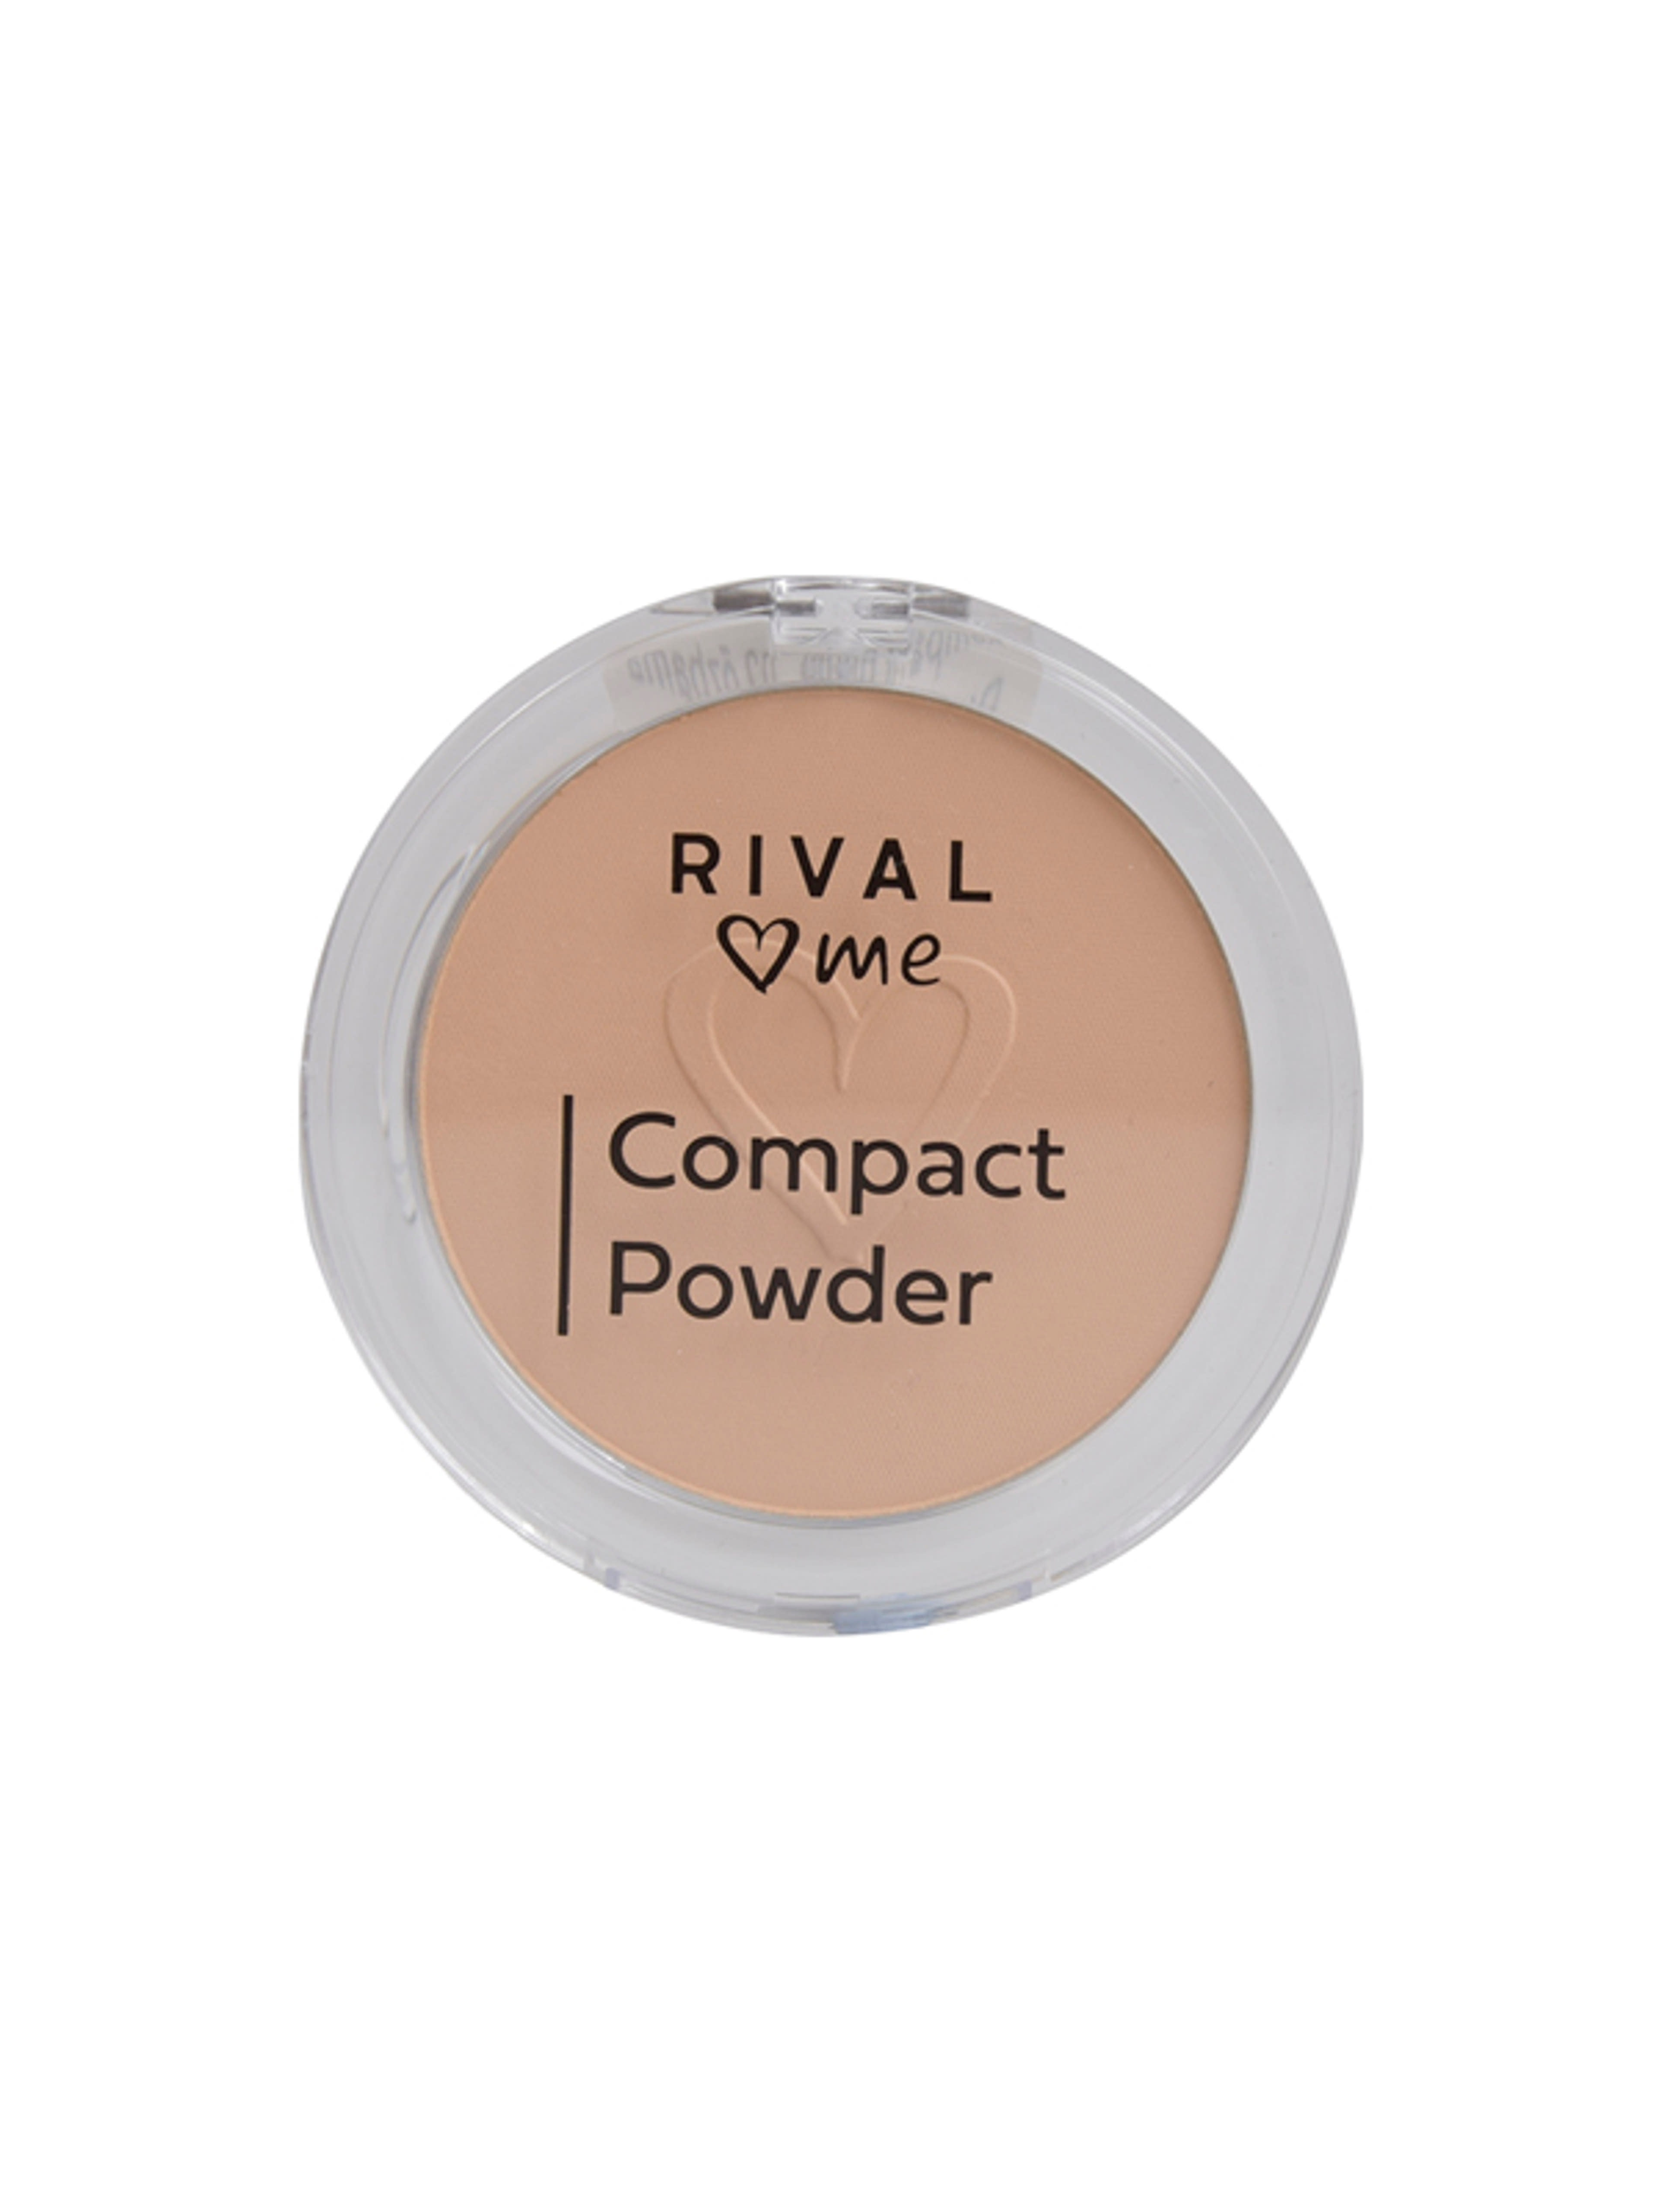 Rival Loves Me púder compact 02 fawn - 1 db